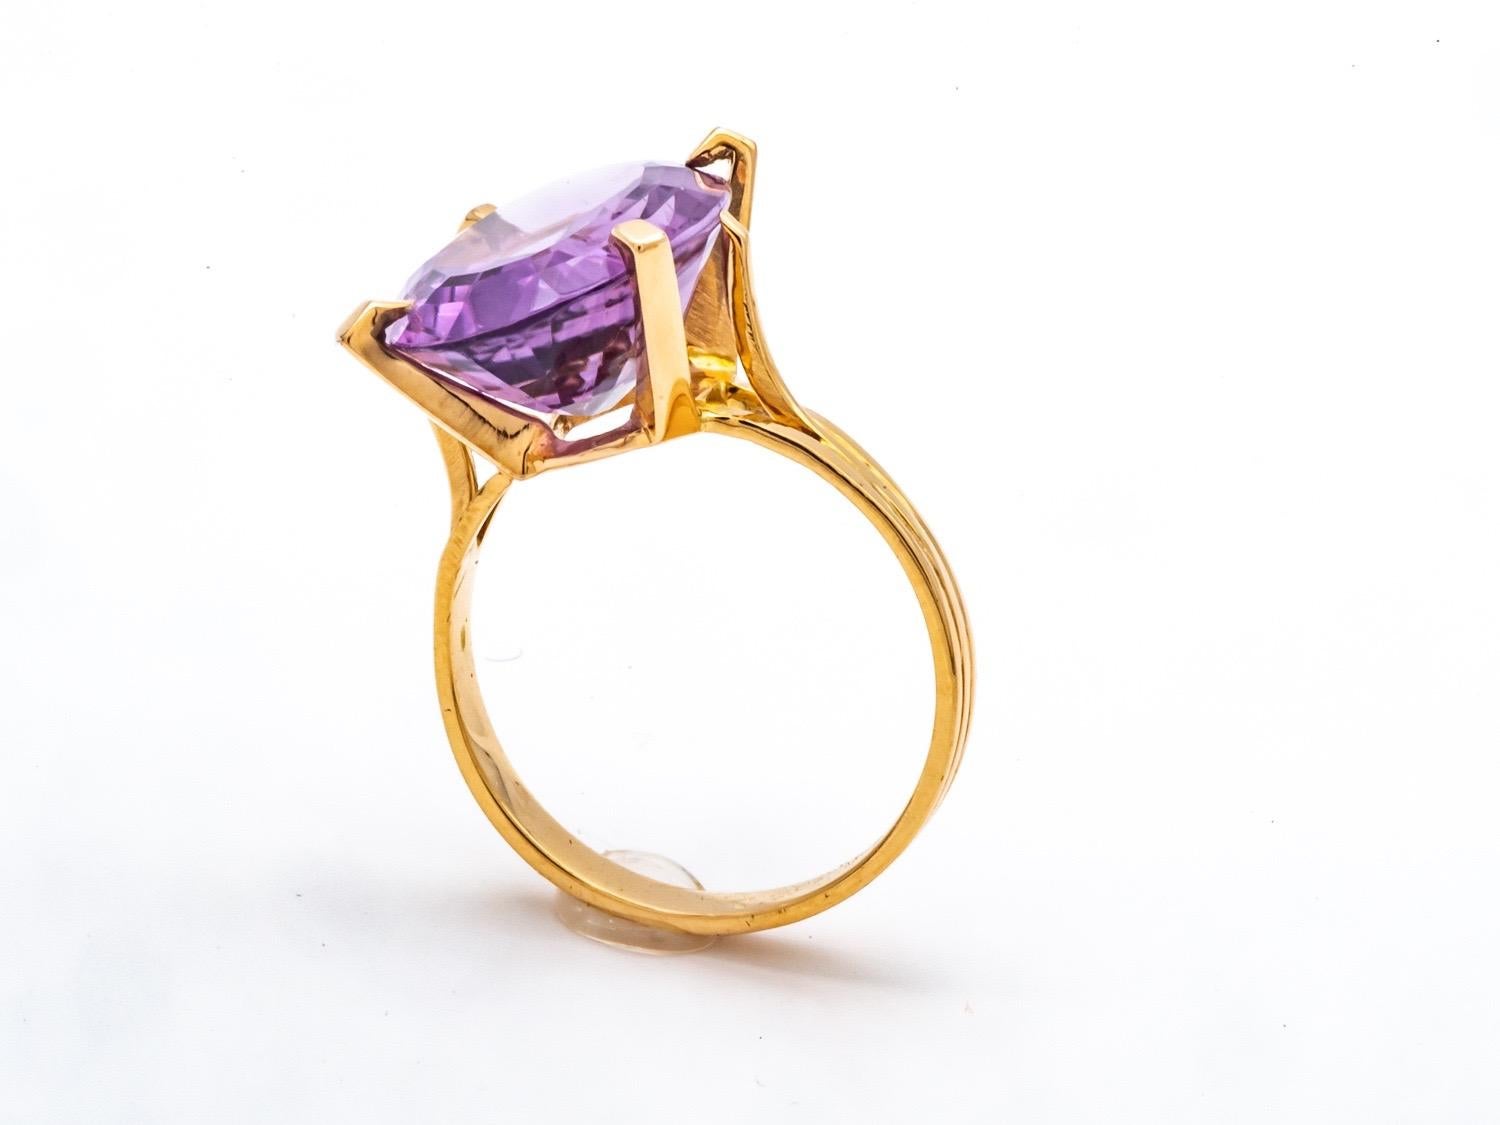 Discover this magnificent ring in 18-carat yellow gold, adorned with a splendid purple amethyst. This exceptional piece is the perfect complement to your outfit for any occasion.

The oval-shaped amethyst gives this ring a timeless elegance. With a